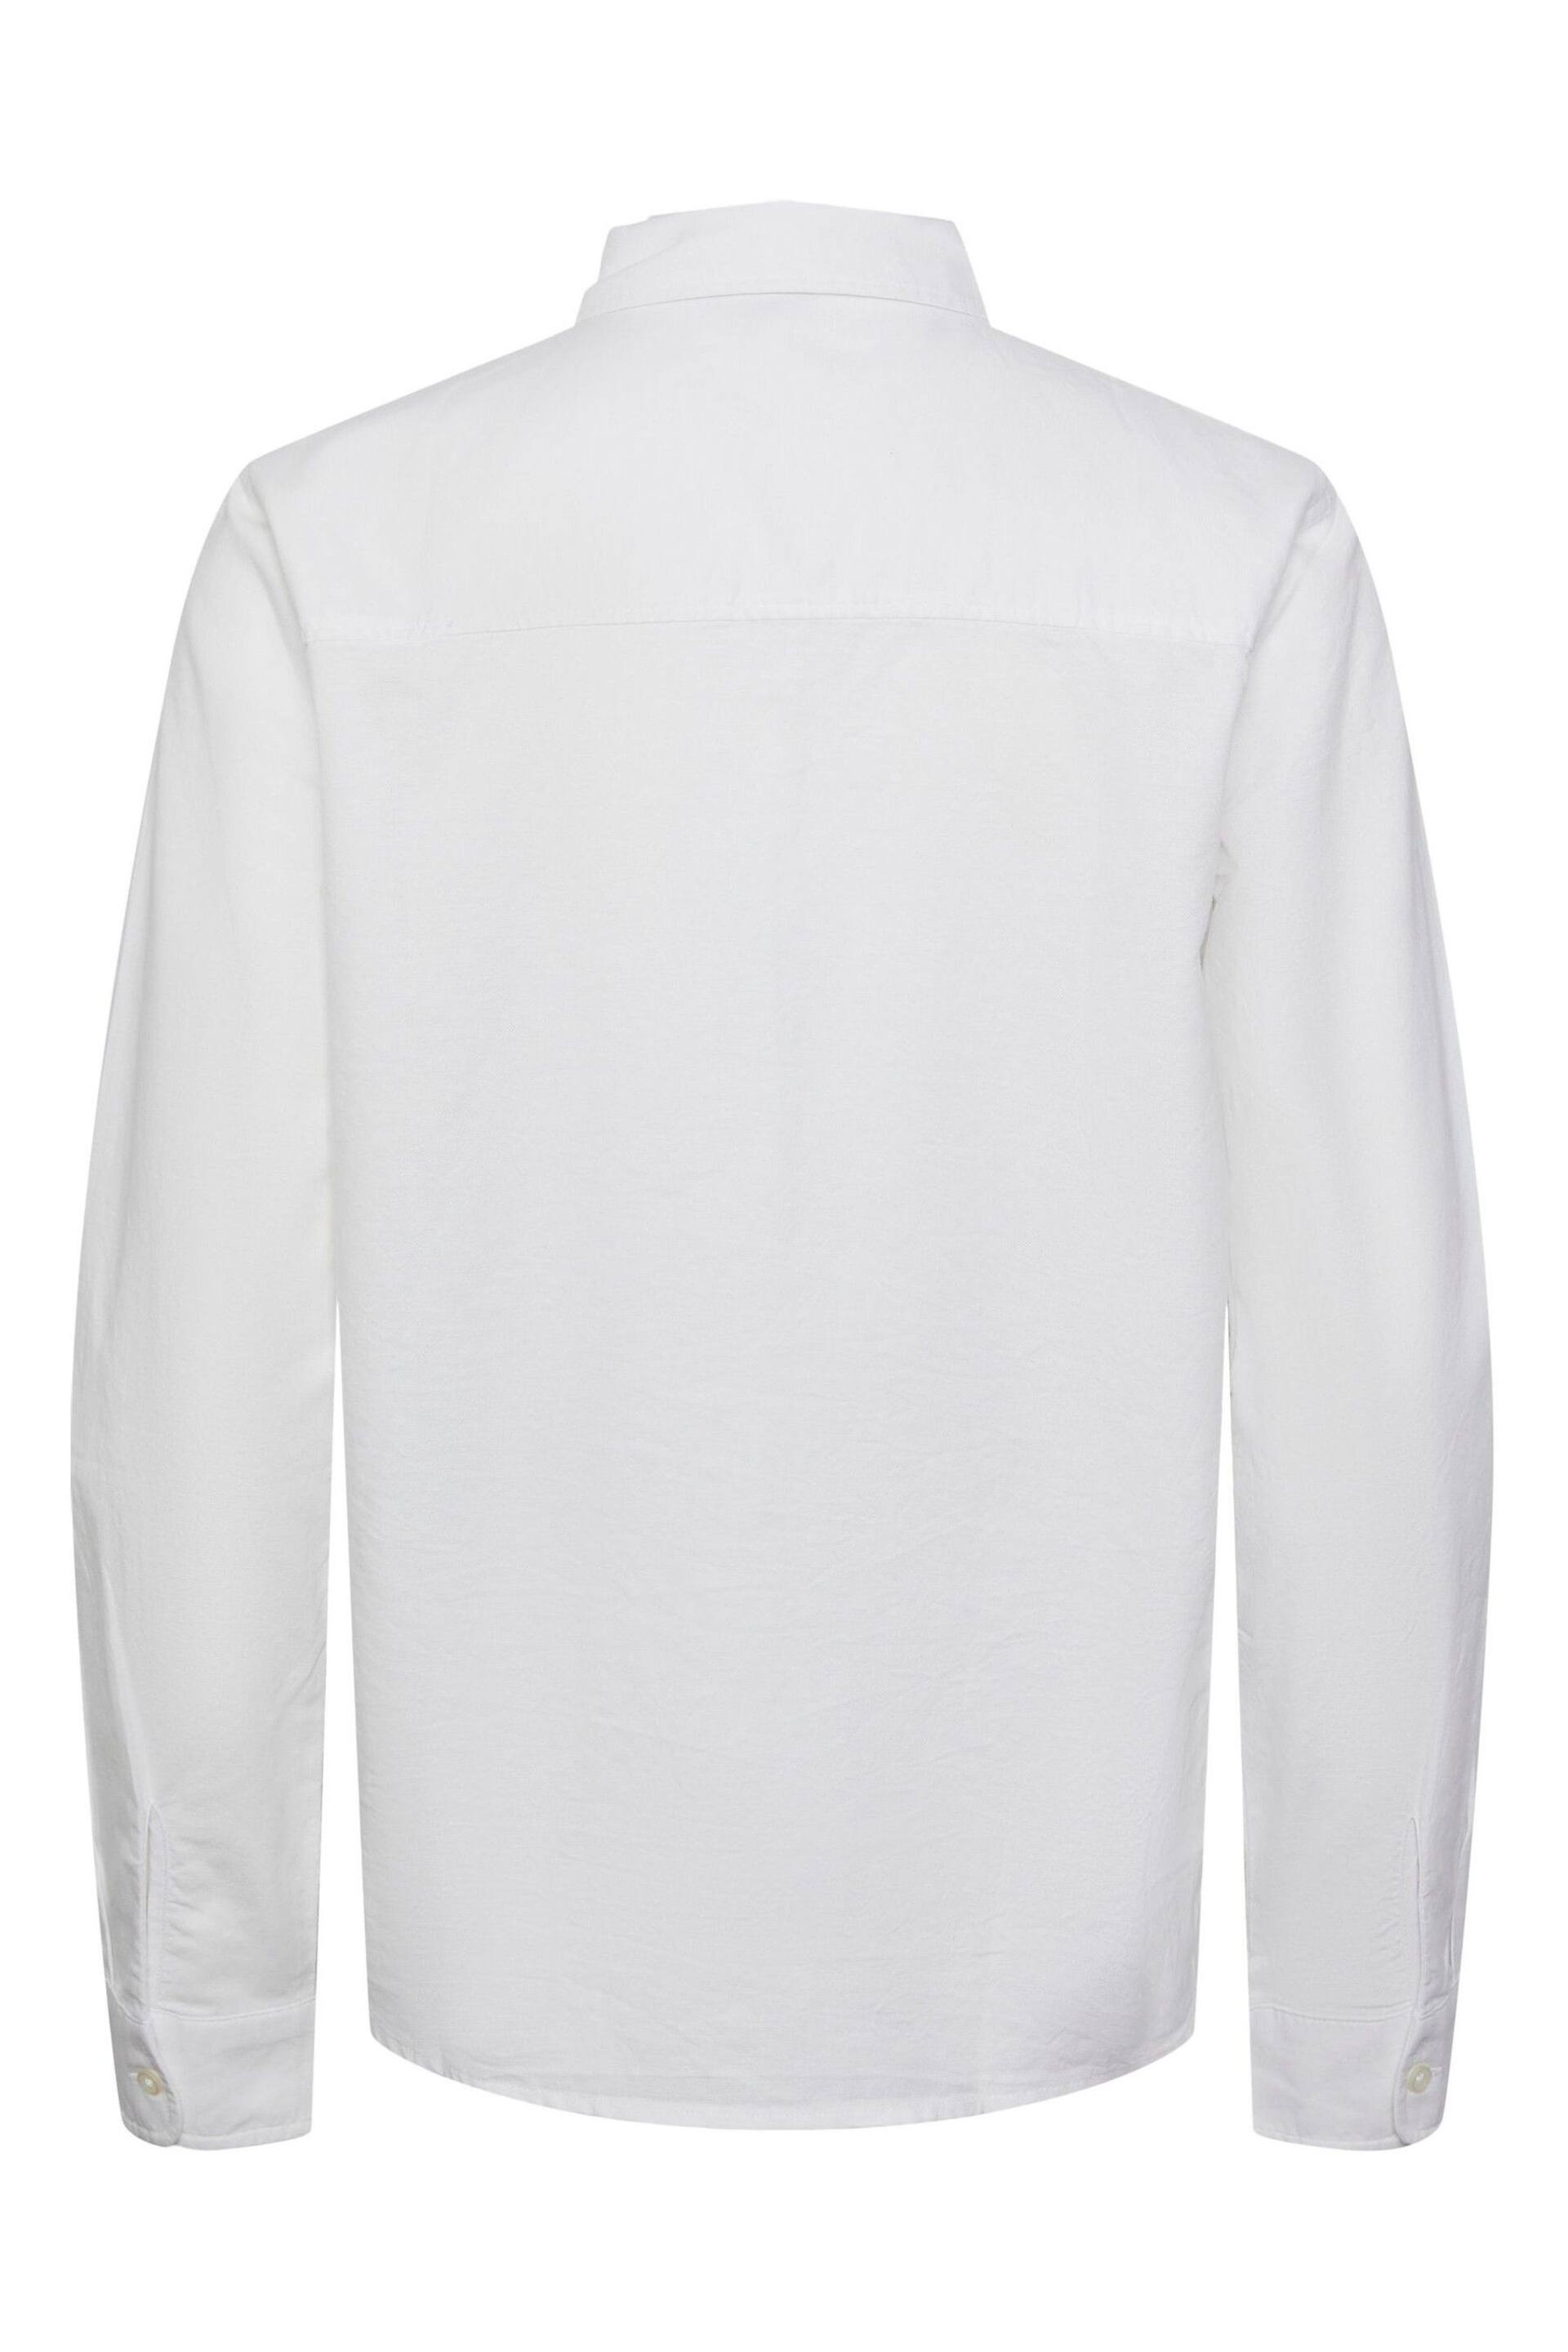 Pieces White Classic Oxford Workwear Shirt - Image 5 of 5